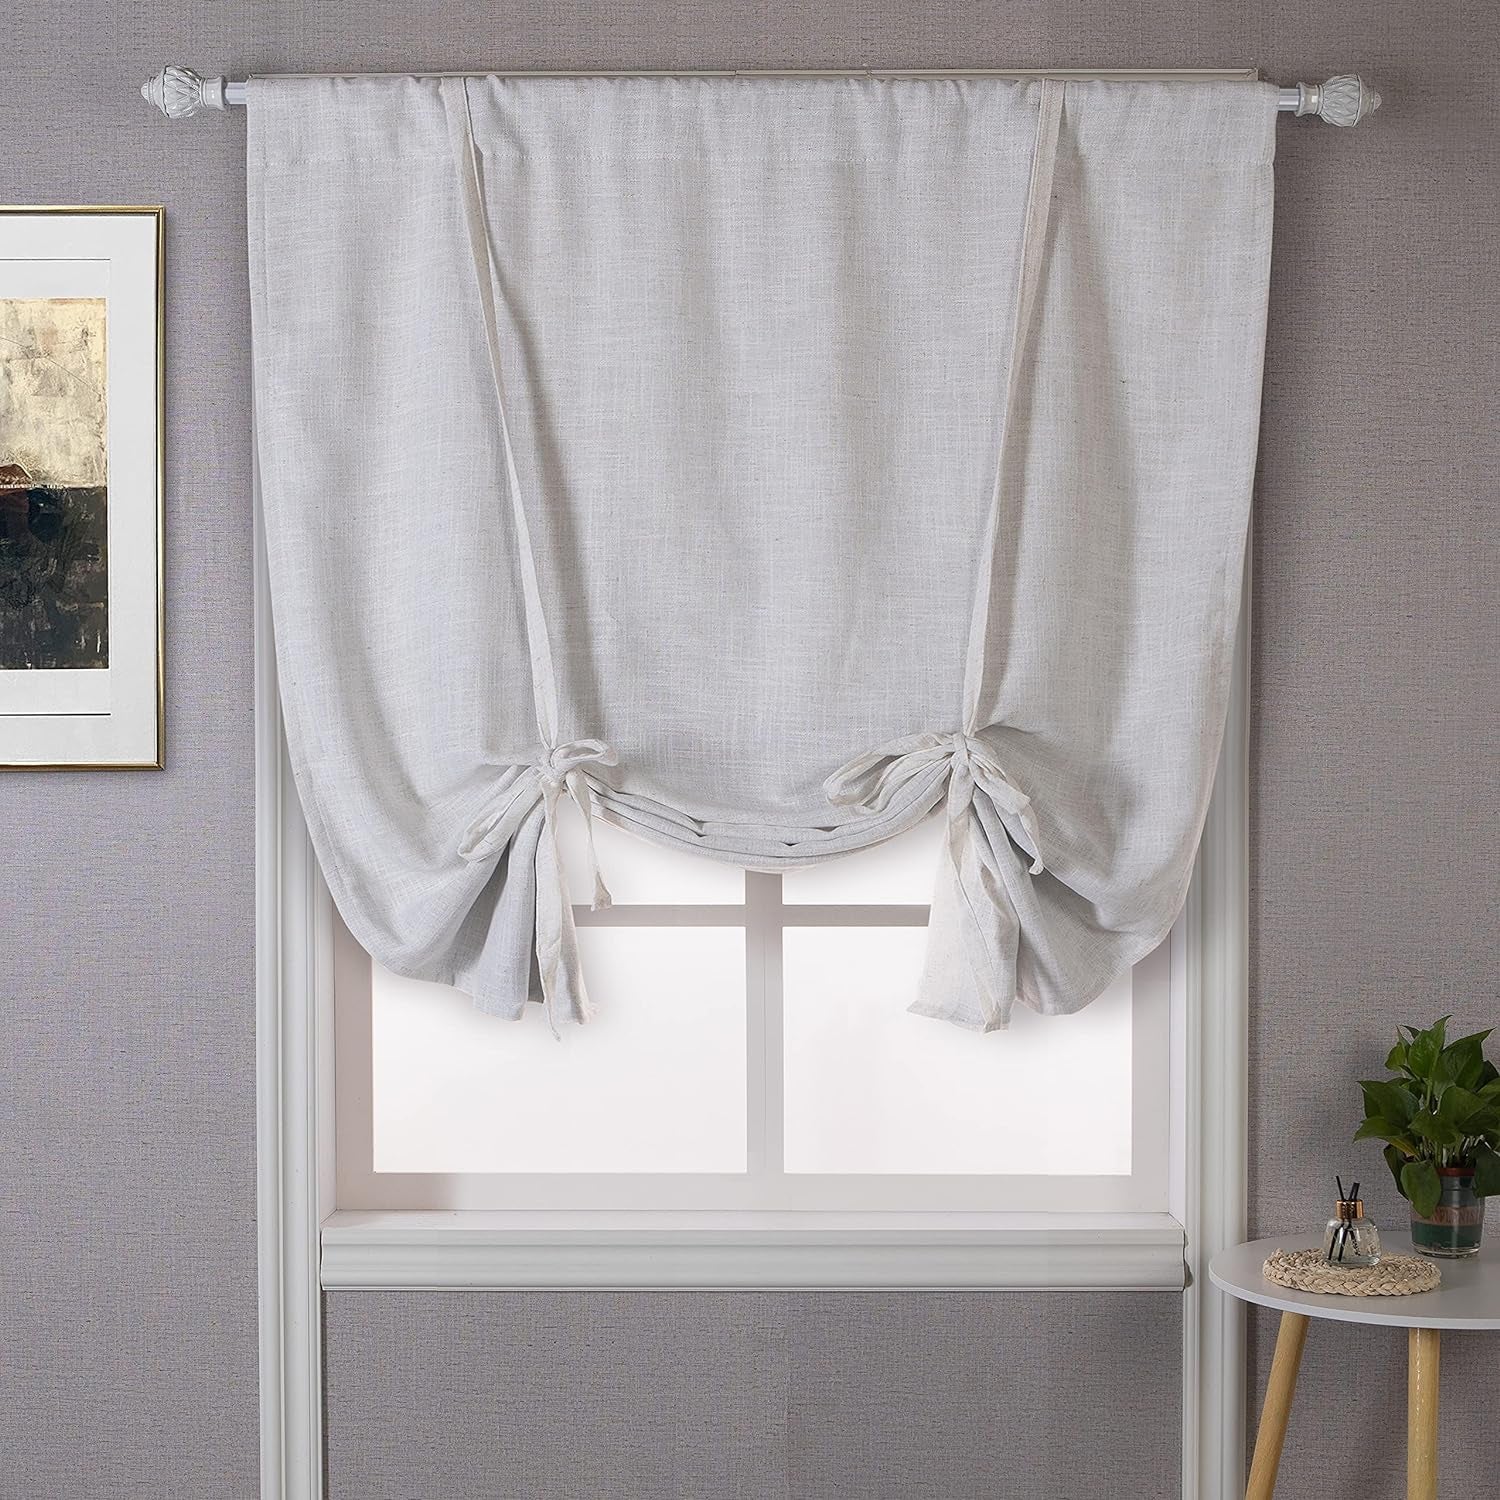 Driftaway Blackout Linen Textured Solid Basic Room Darkening Thermal Insulated Tie up Adjustable Balloon Rod Pocket Linen Curtains for Small Window 25 Inch by 47 Inch Light Linen  DriftAway Ivory 45"X63" 